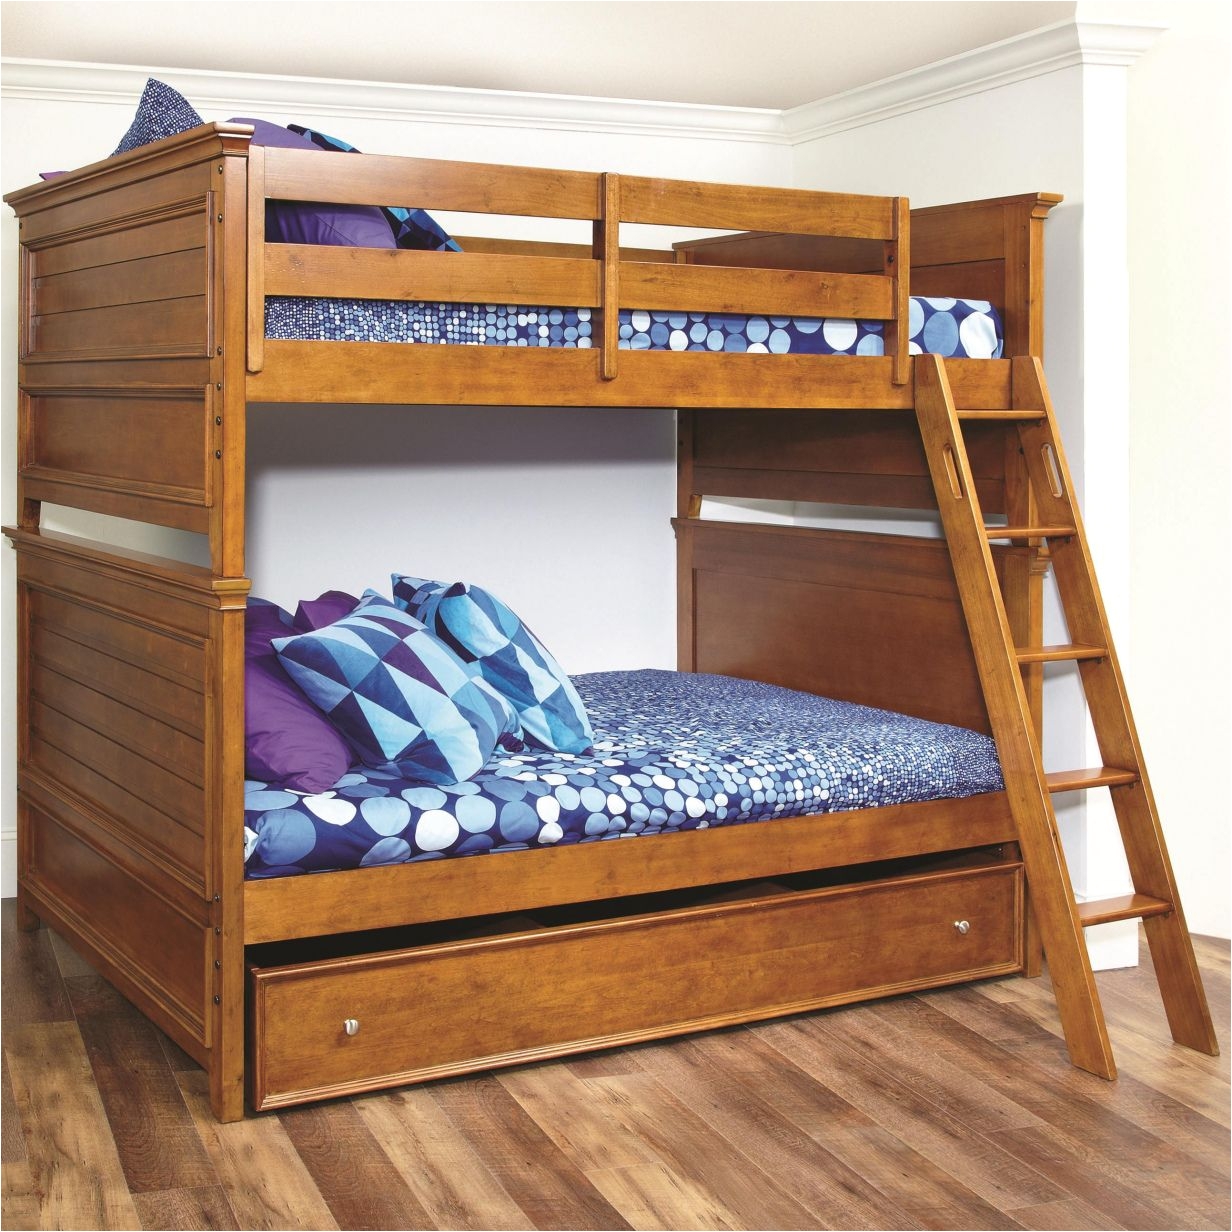 lovely cargo brand bunk beds check more at http dust war com cargo brand bunk beds